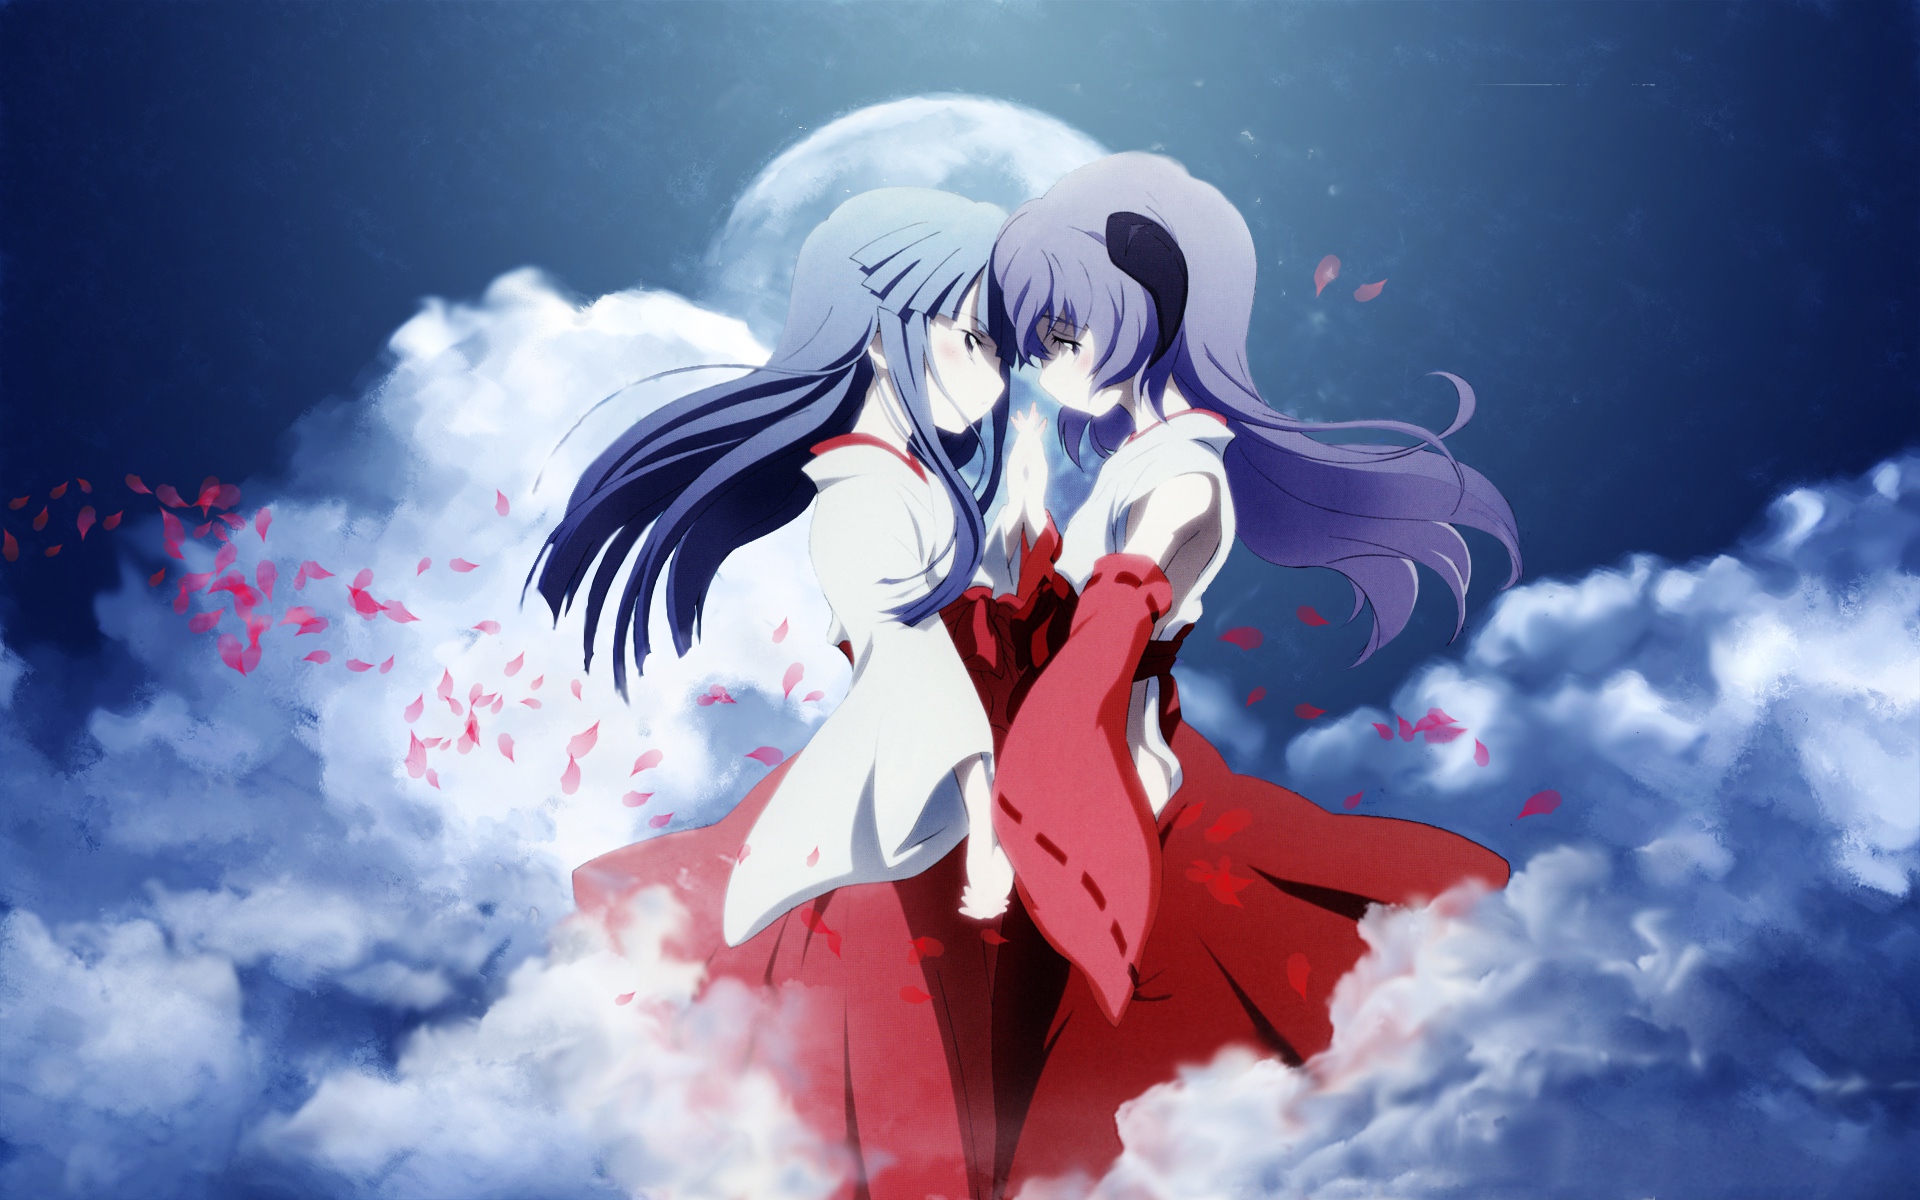 Furude Hanyū and Furude Rika from the anime When They Cry, in a heartwarming yuri moment.